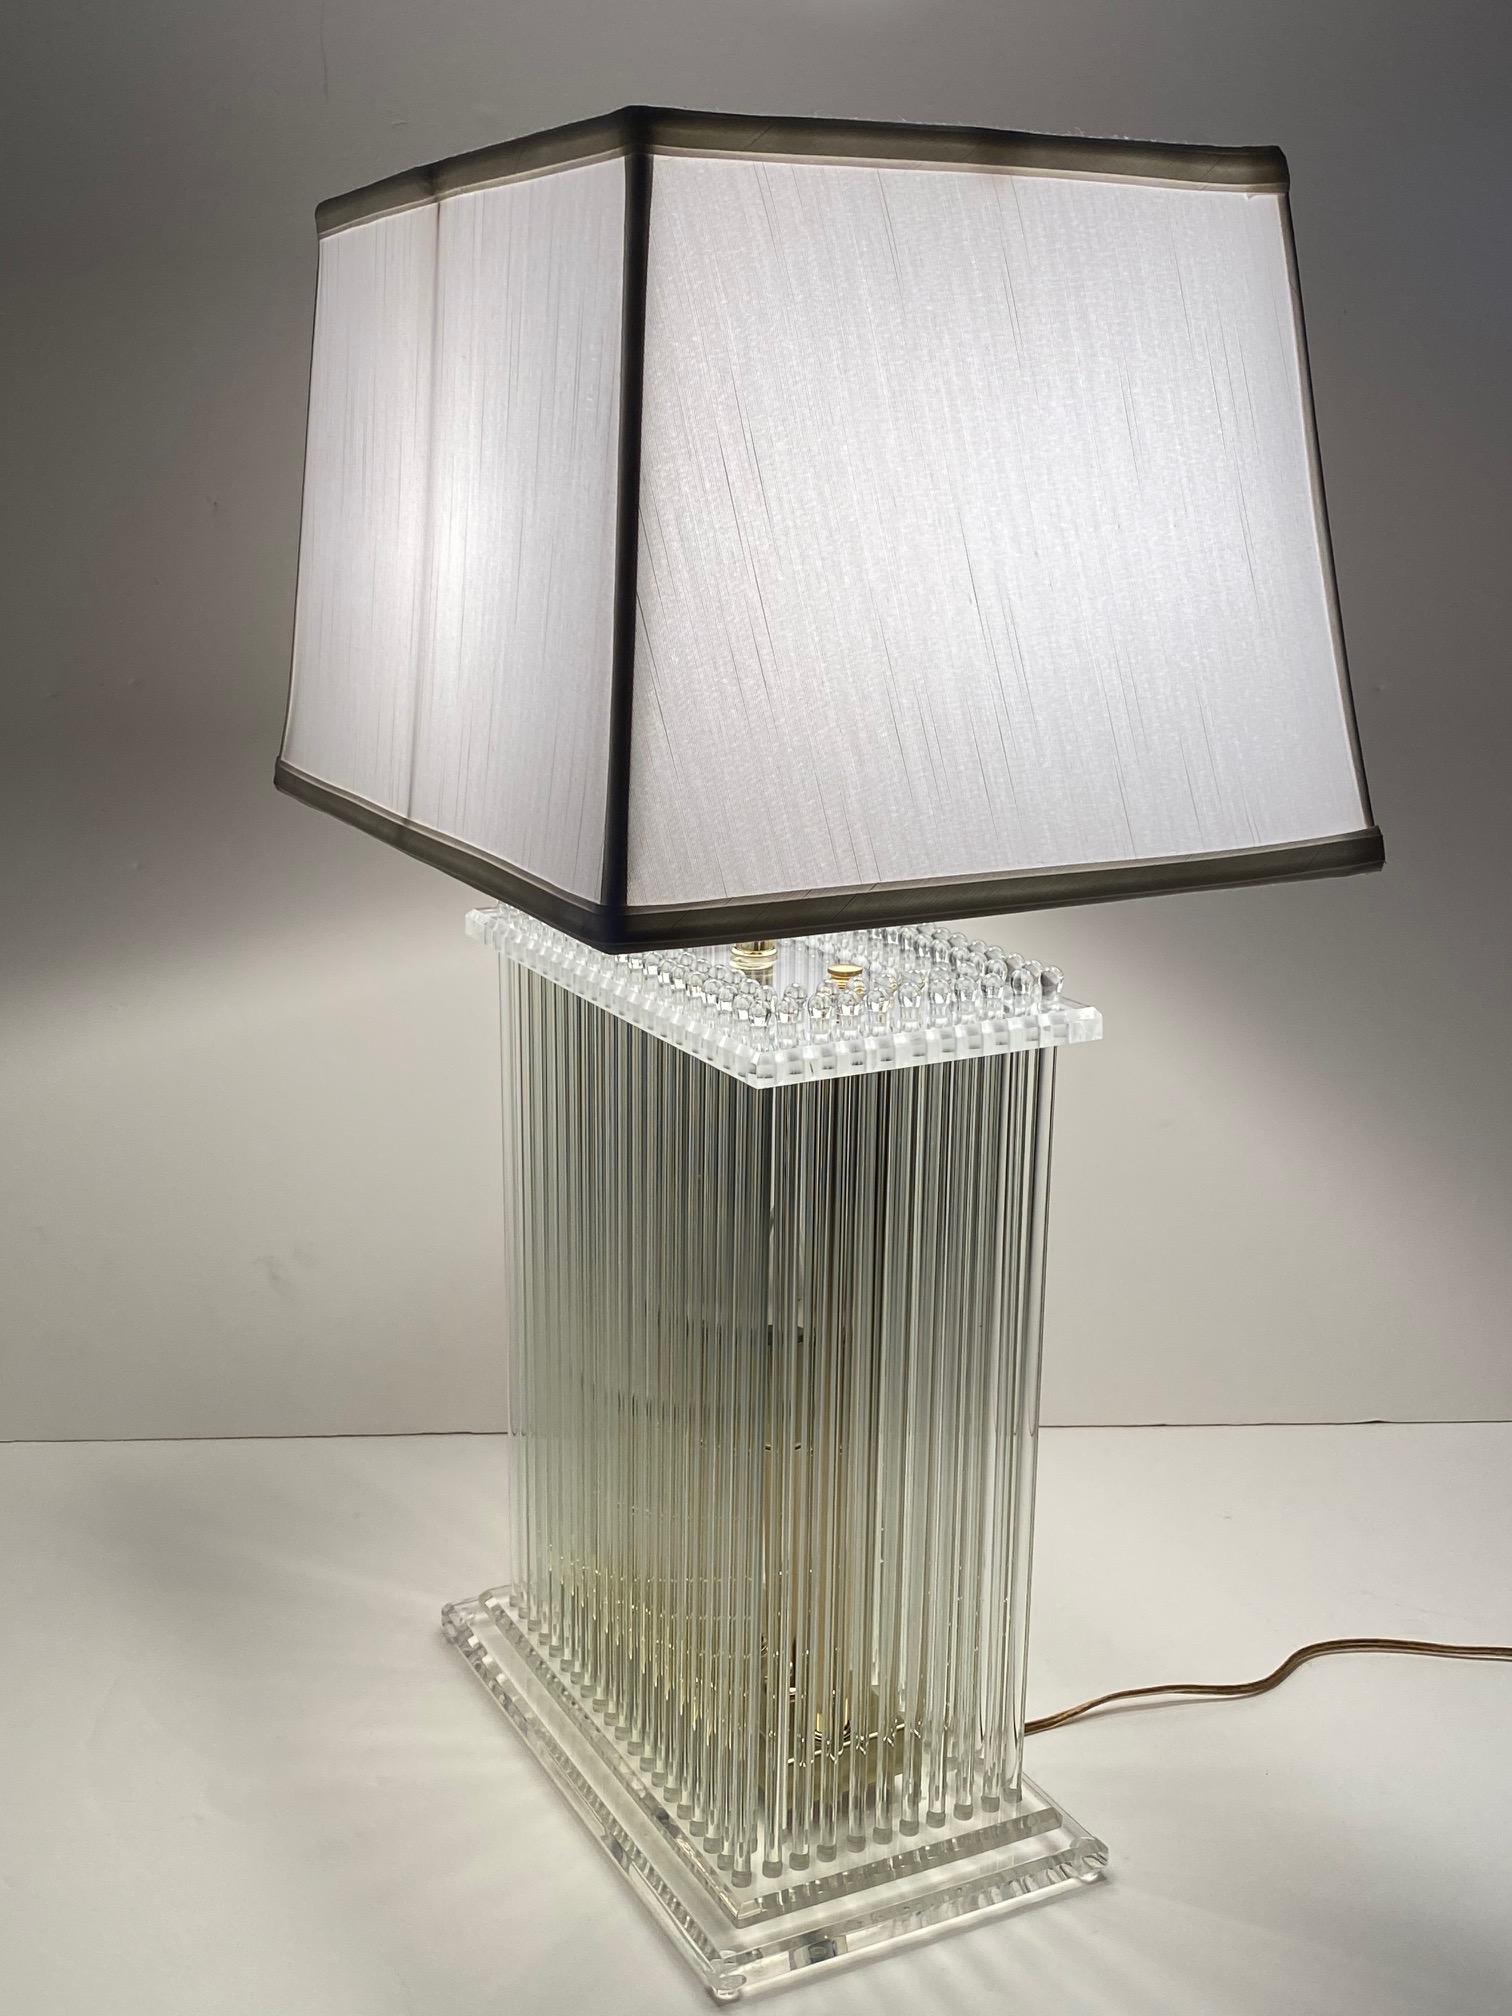 A glamorous Lucite and brass table lamp ingeniously designed with dozens of glass rods around the rectangular periphery.
Shade optional. The shade in photos is 16 W x 12 D x 10 H.